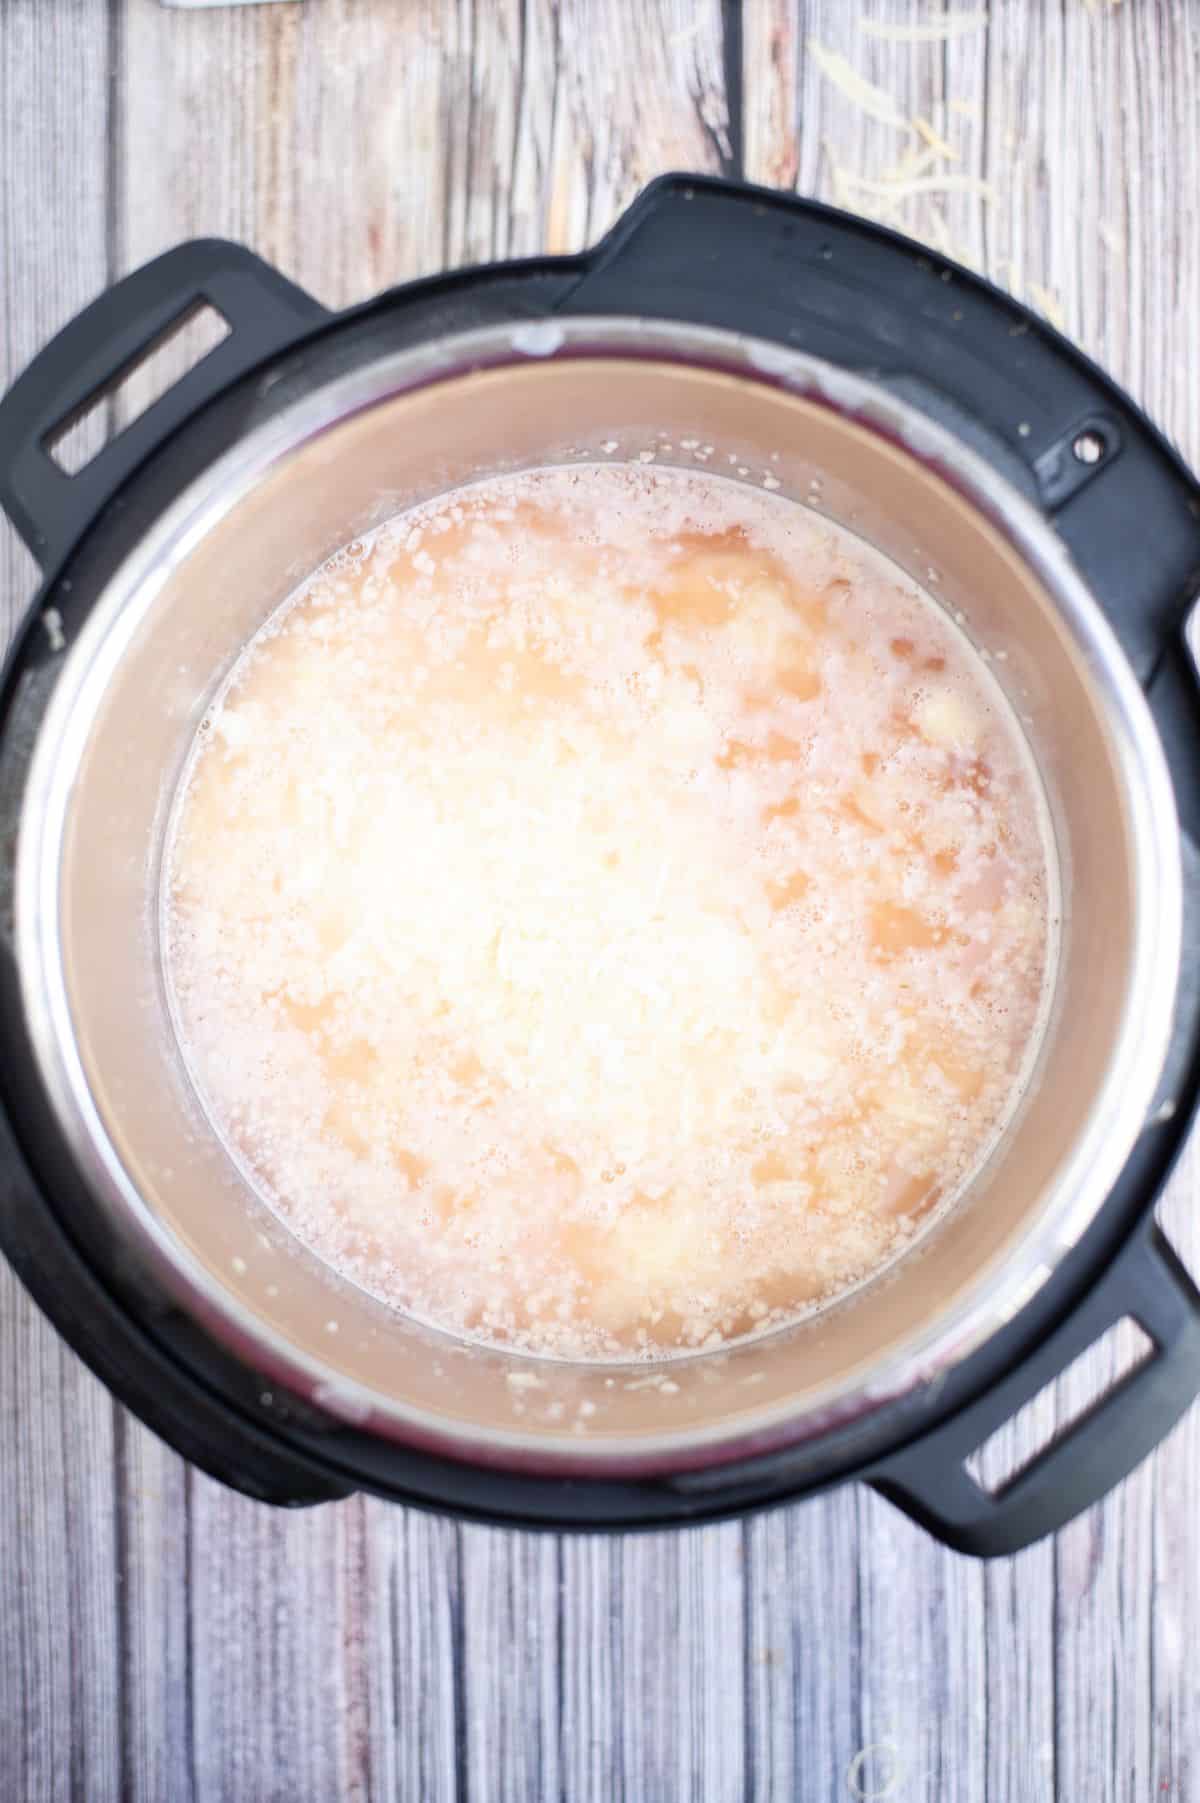 Wine, water, garlic, lemon juice, and cheese inside the instant pot